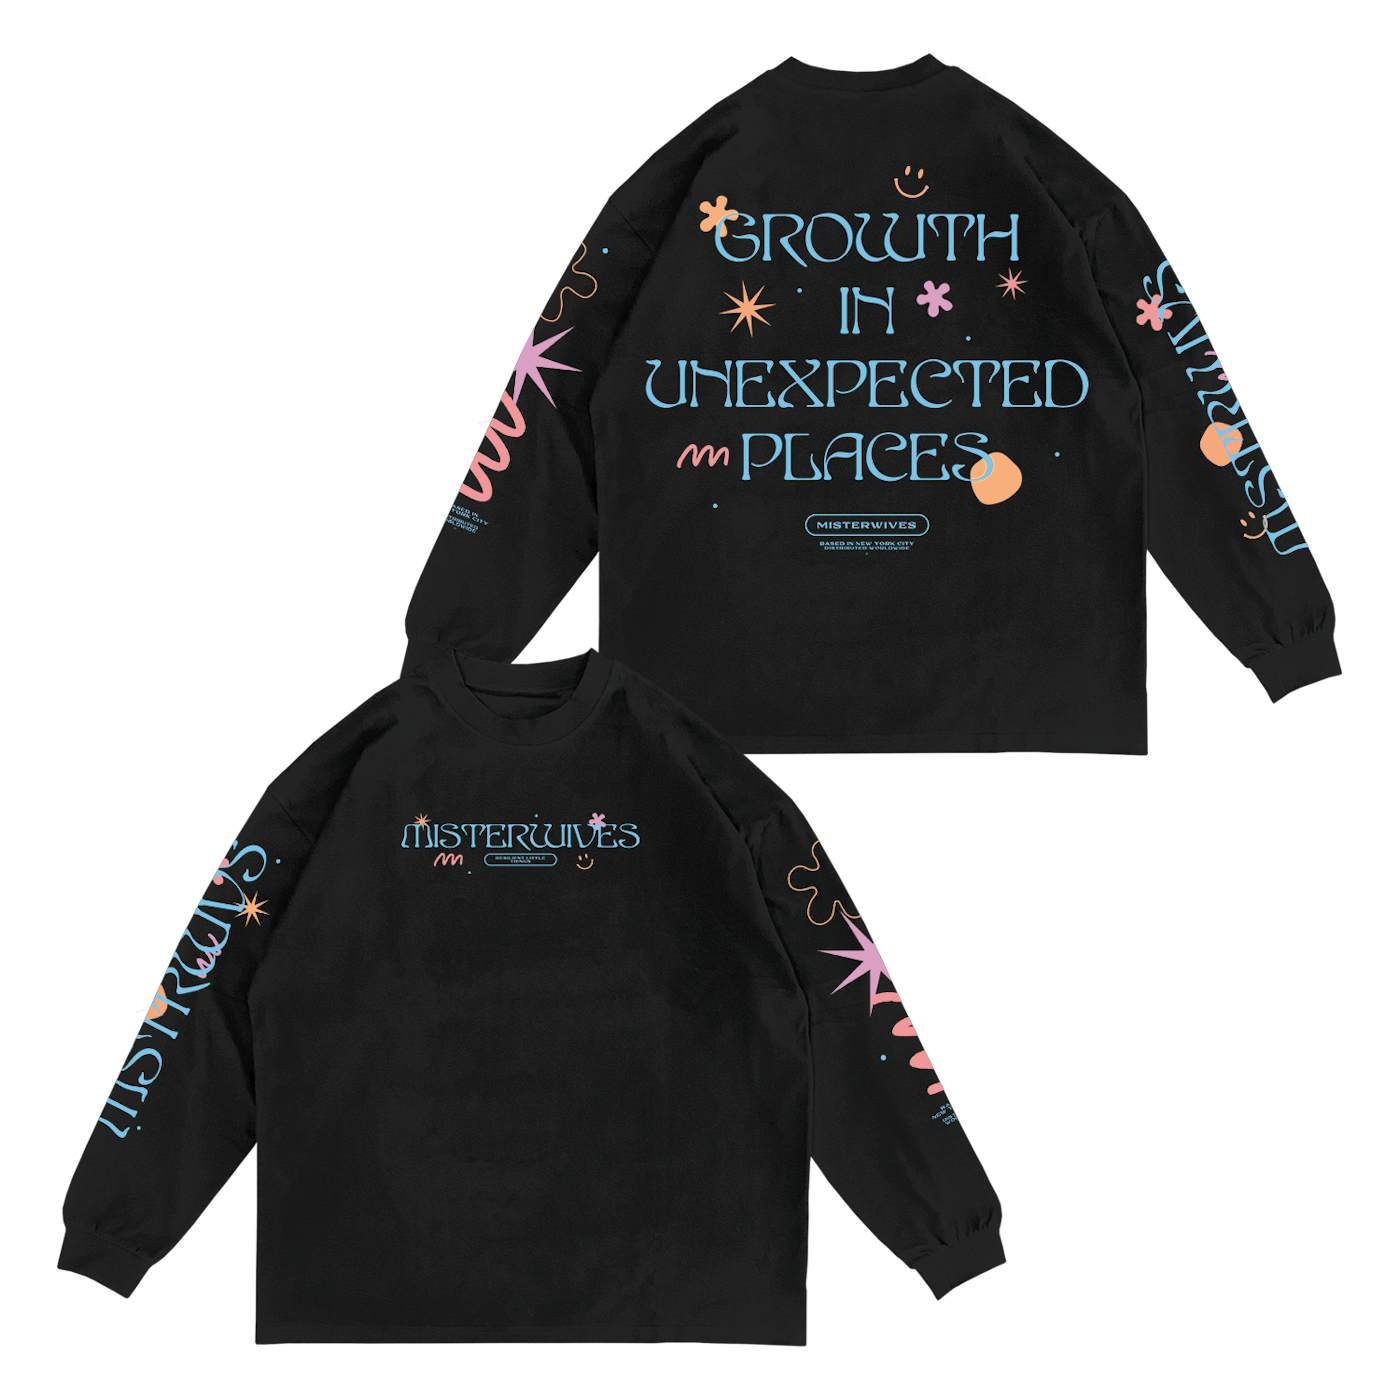 MisterWives Growth In Unexpected Places Black Longsleeve